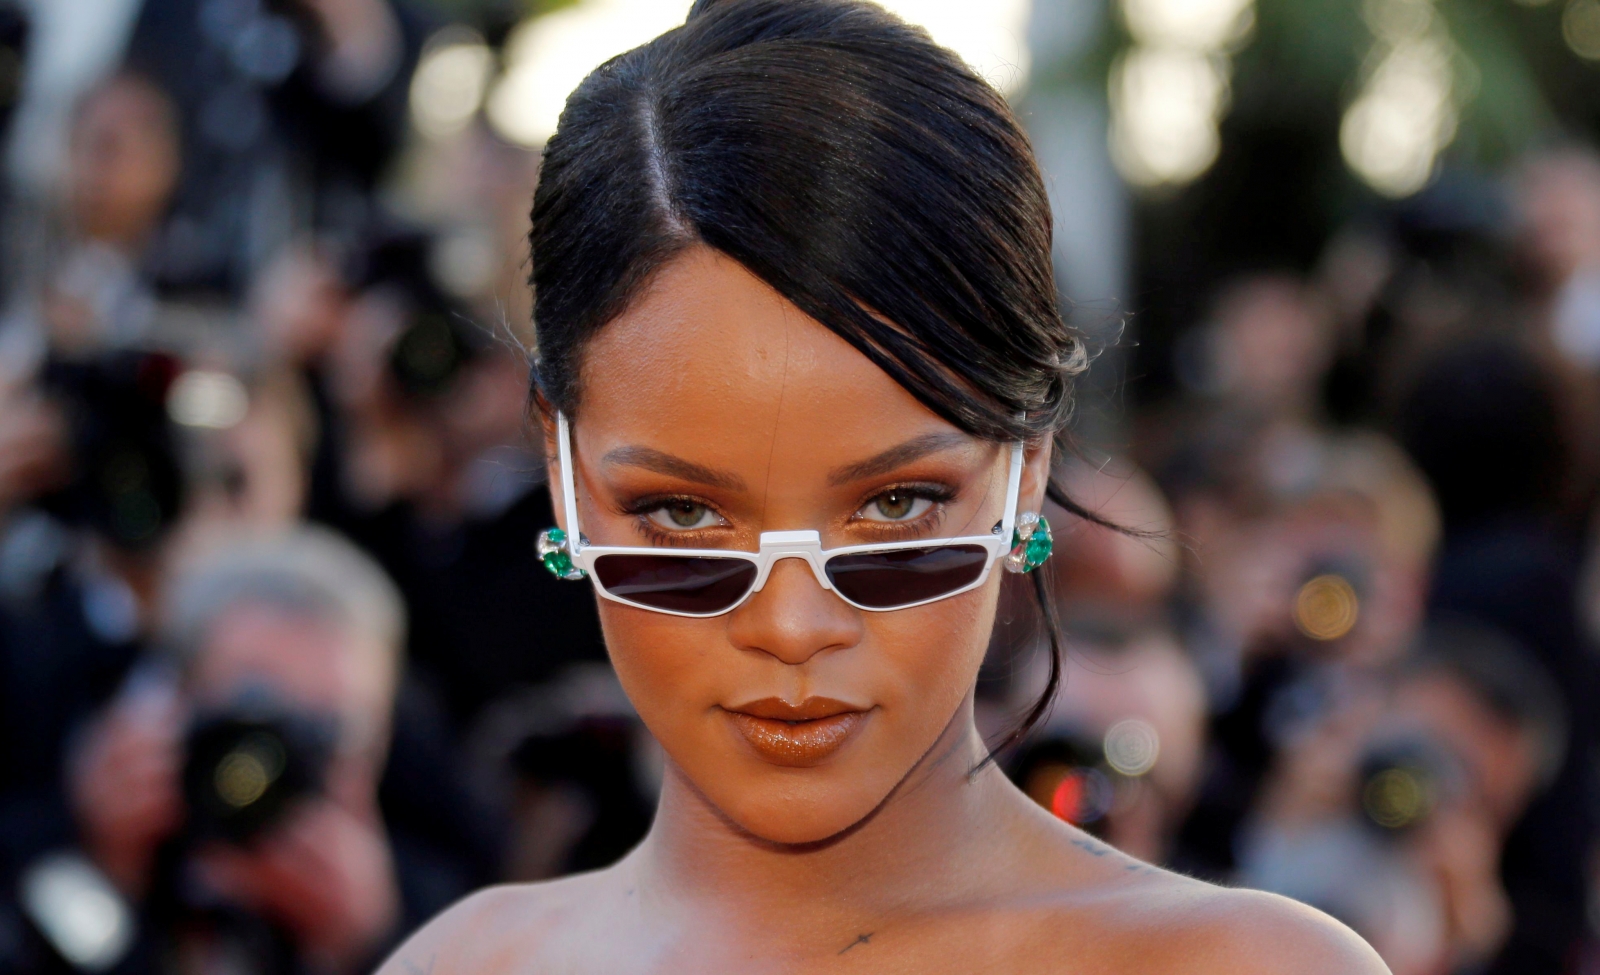 Rihanna relationship rumours sparked after she is seen with new man in Spain